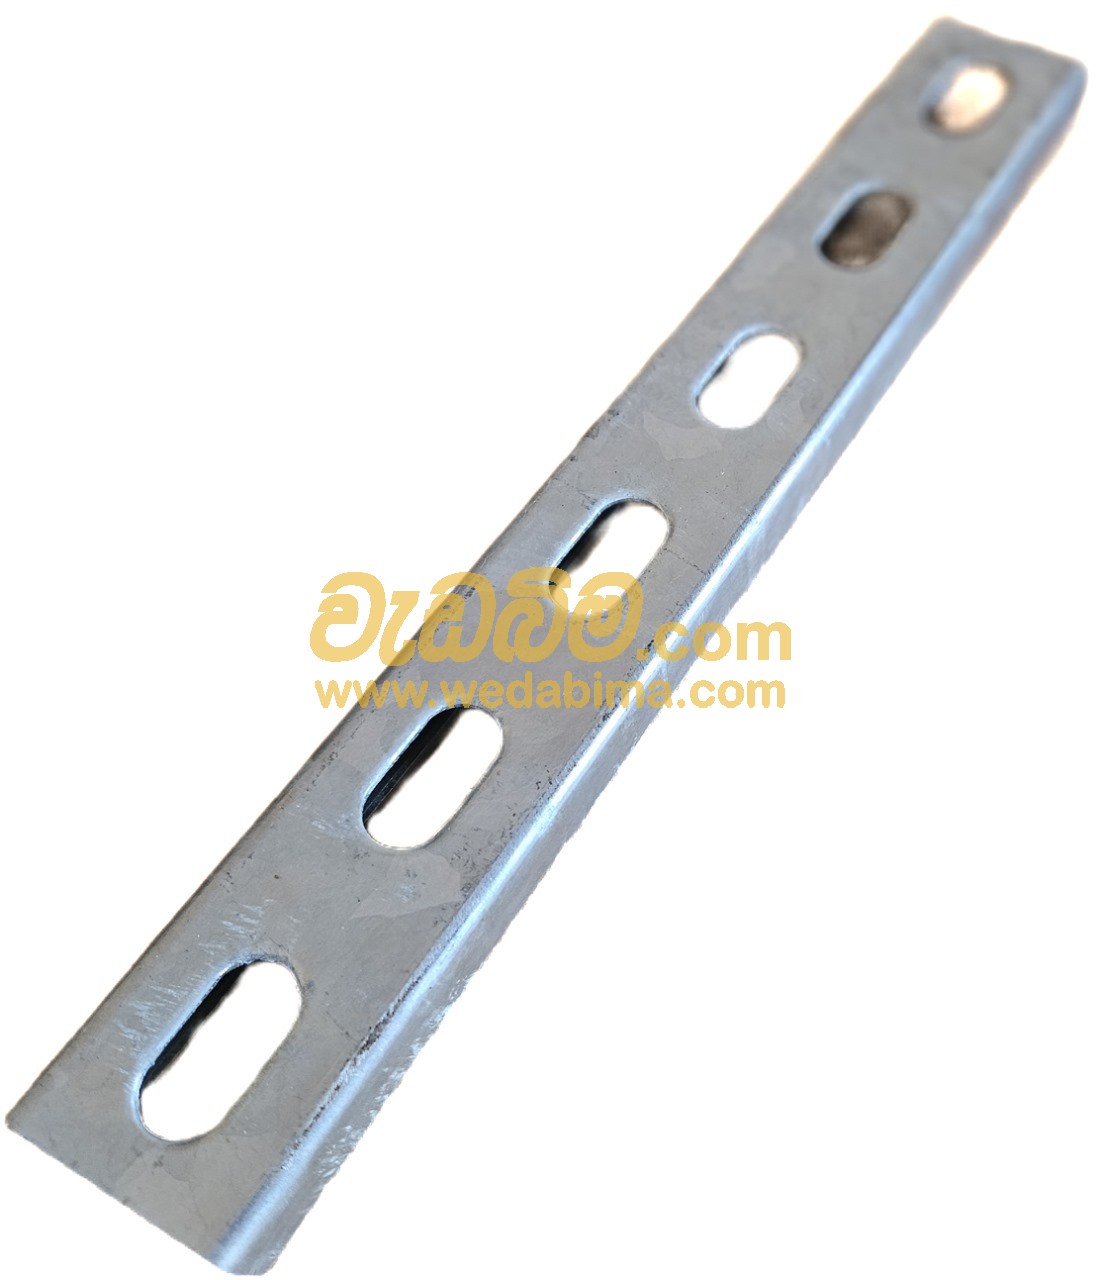 Cover image for Stainless Steel Slotted Channel Price in Sri Lanka